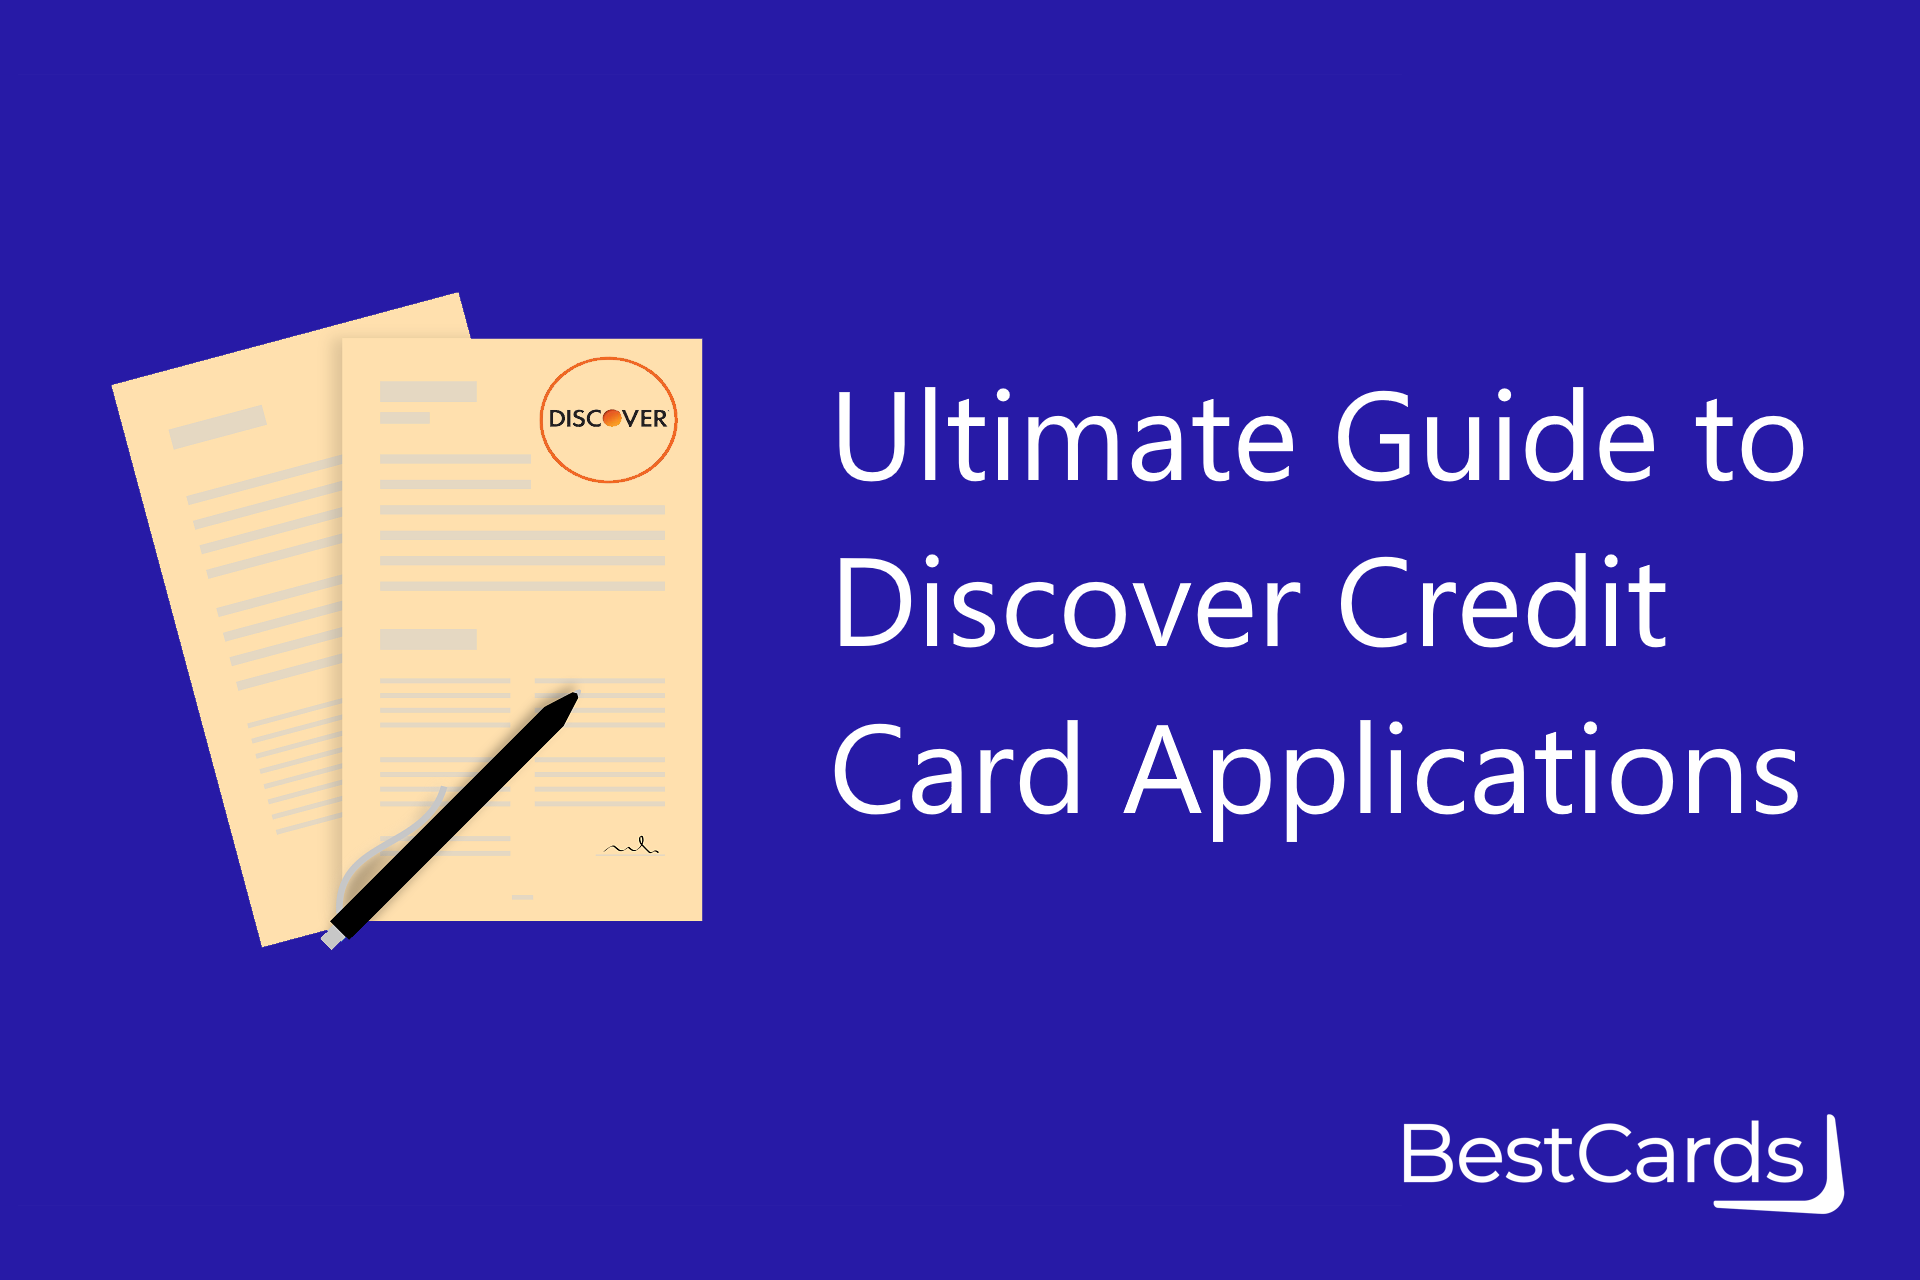 Your guide to applying for Discover It credit cards, BestCards.com